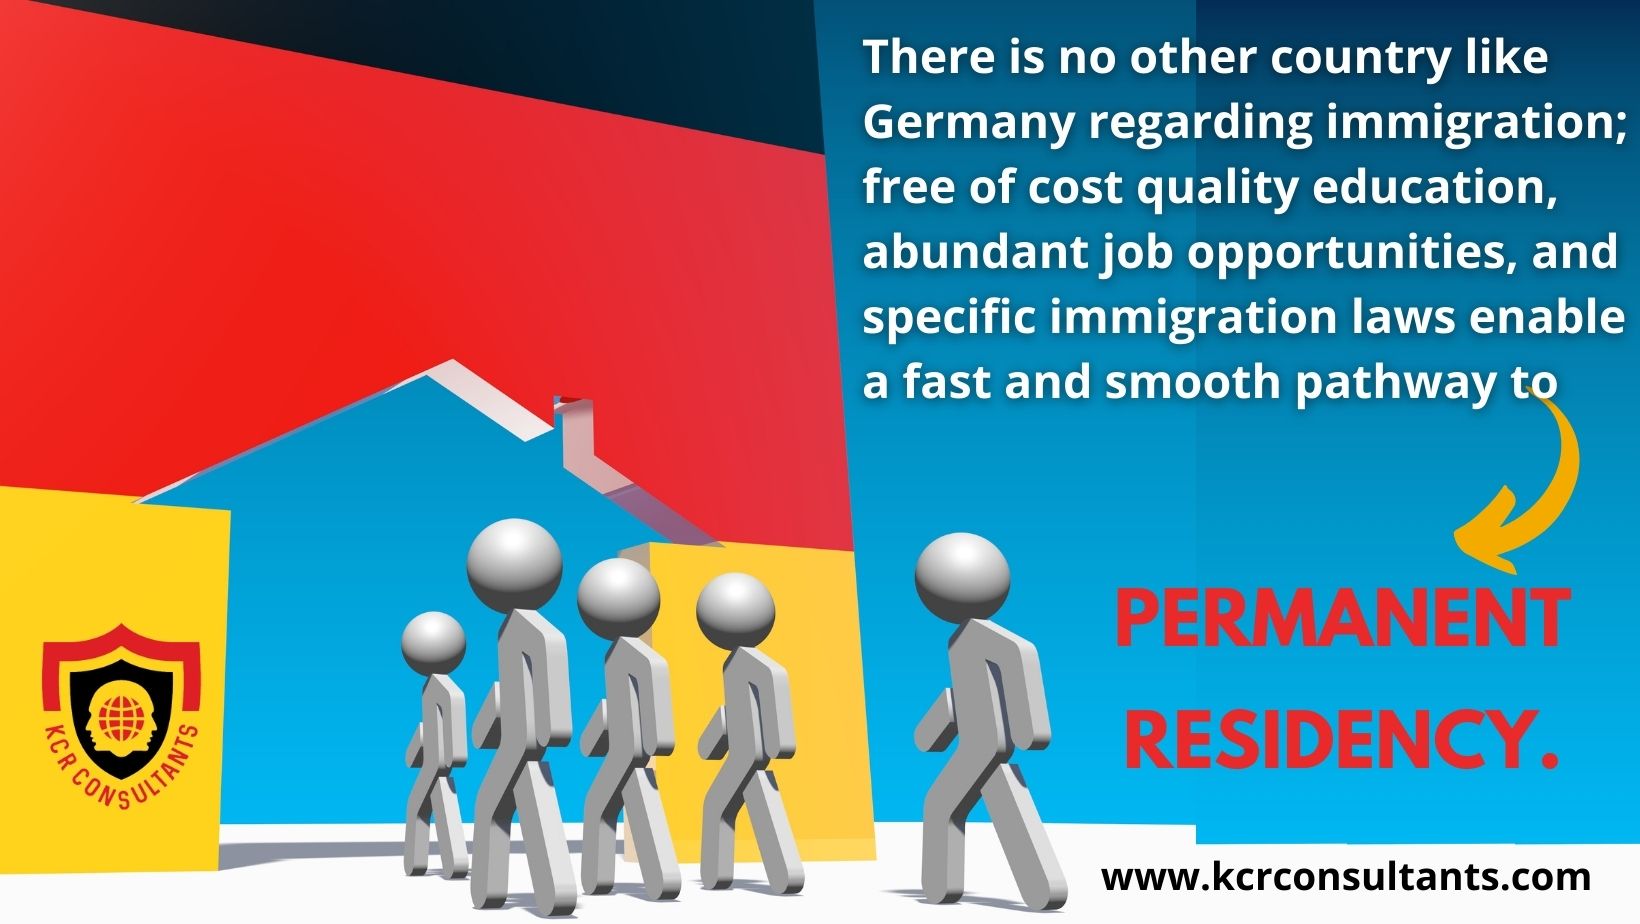 There is no other country like Germany regarding immigration; free of cost quality education, abundant job opportunities, and simmigration laws enable a fast and smooth pathway to PR - KCR COSULTANTS